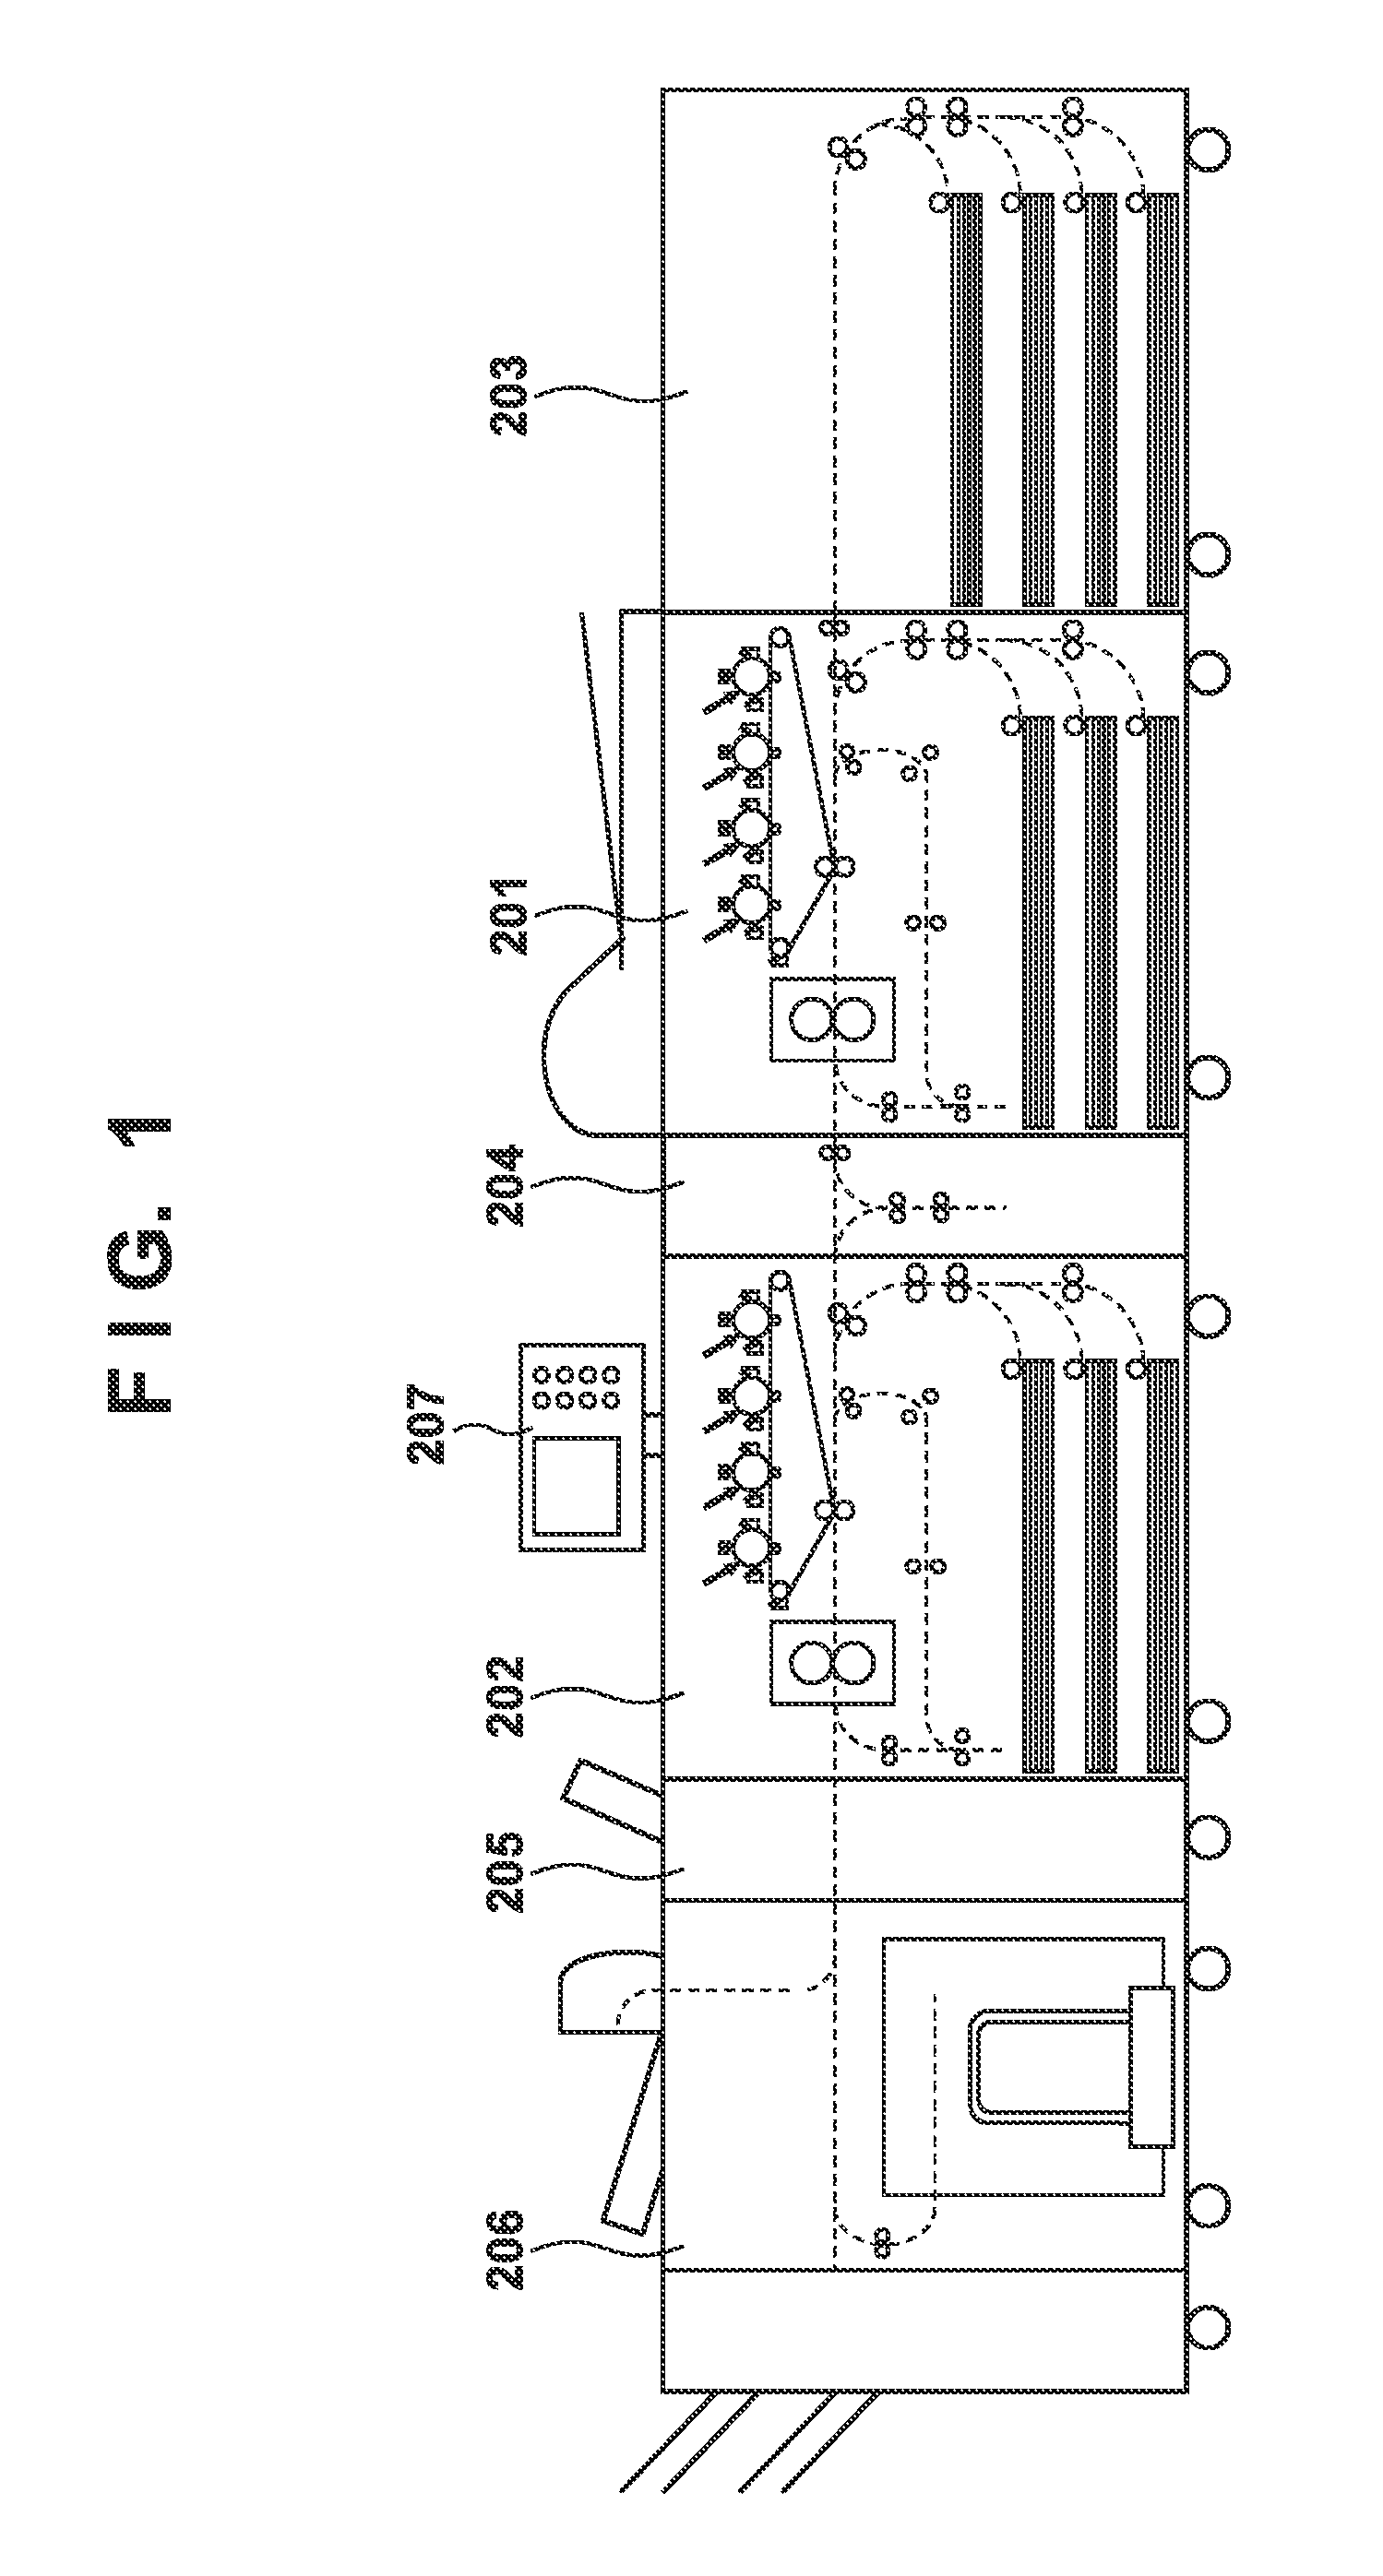 Image forming system and control apparatus utilizing dual image forming apparatuses